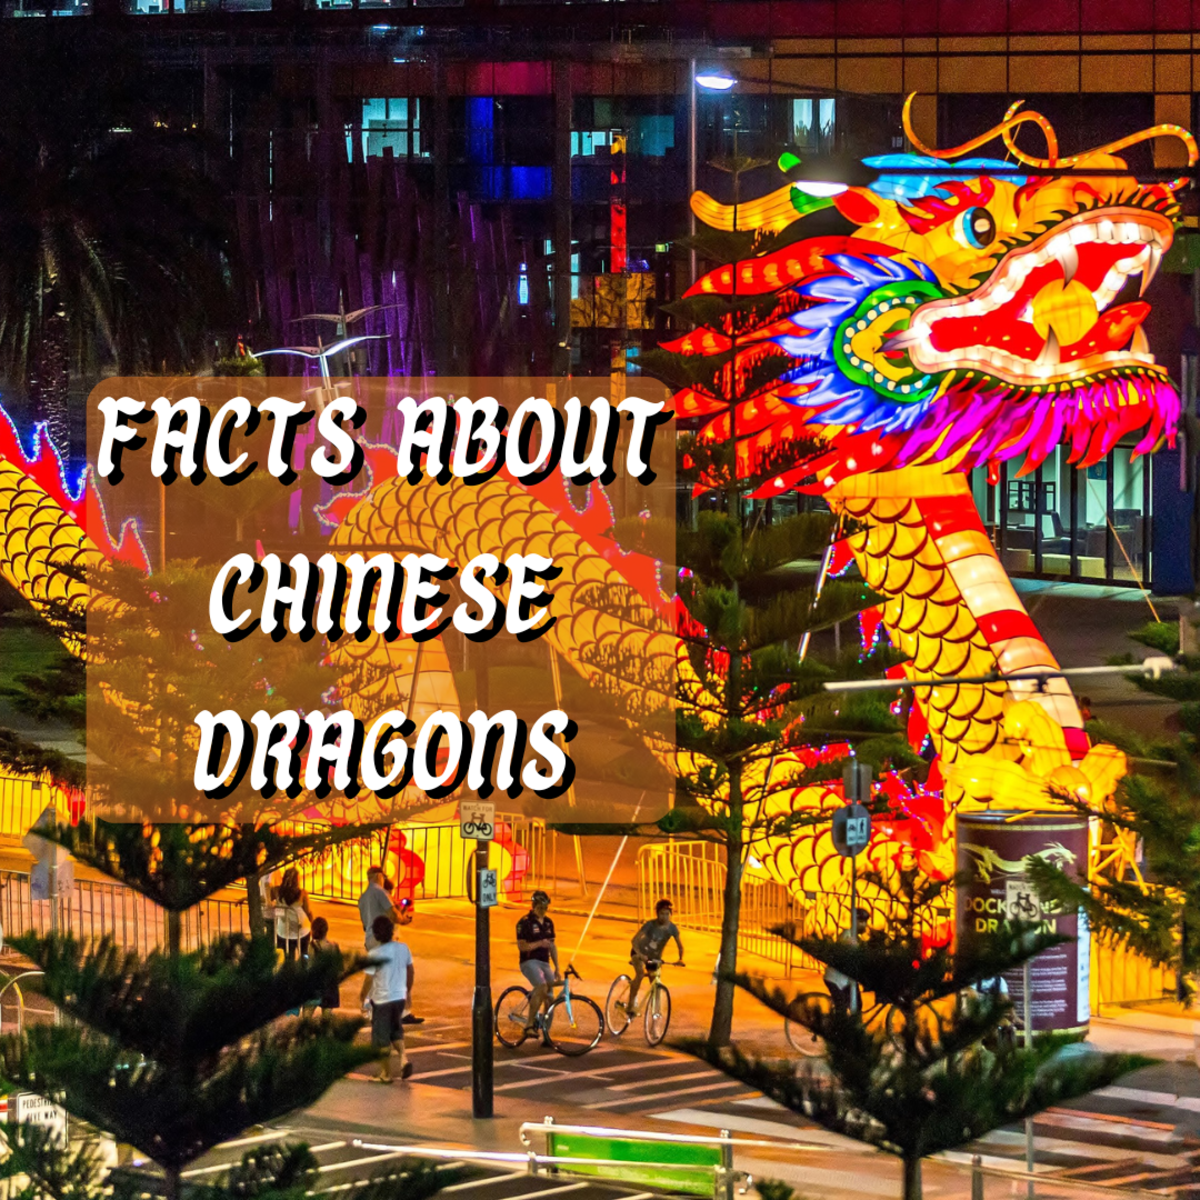 Read on to learn all about Chinese dragons!